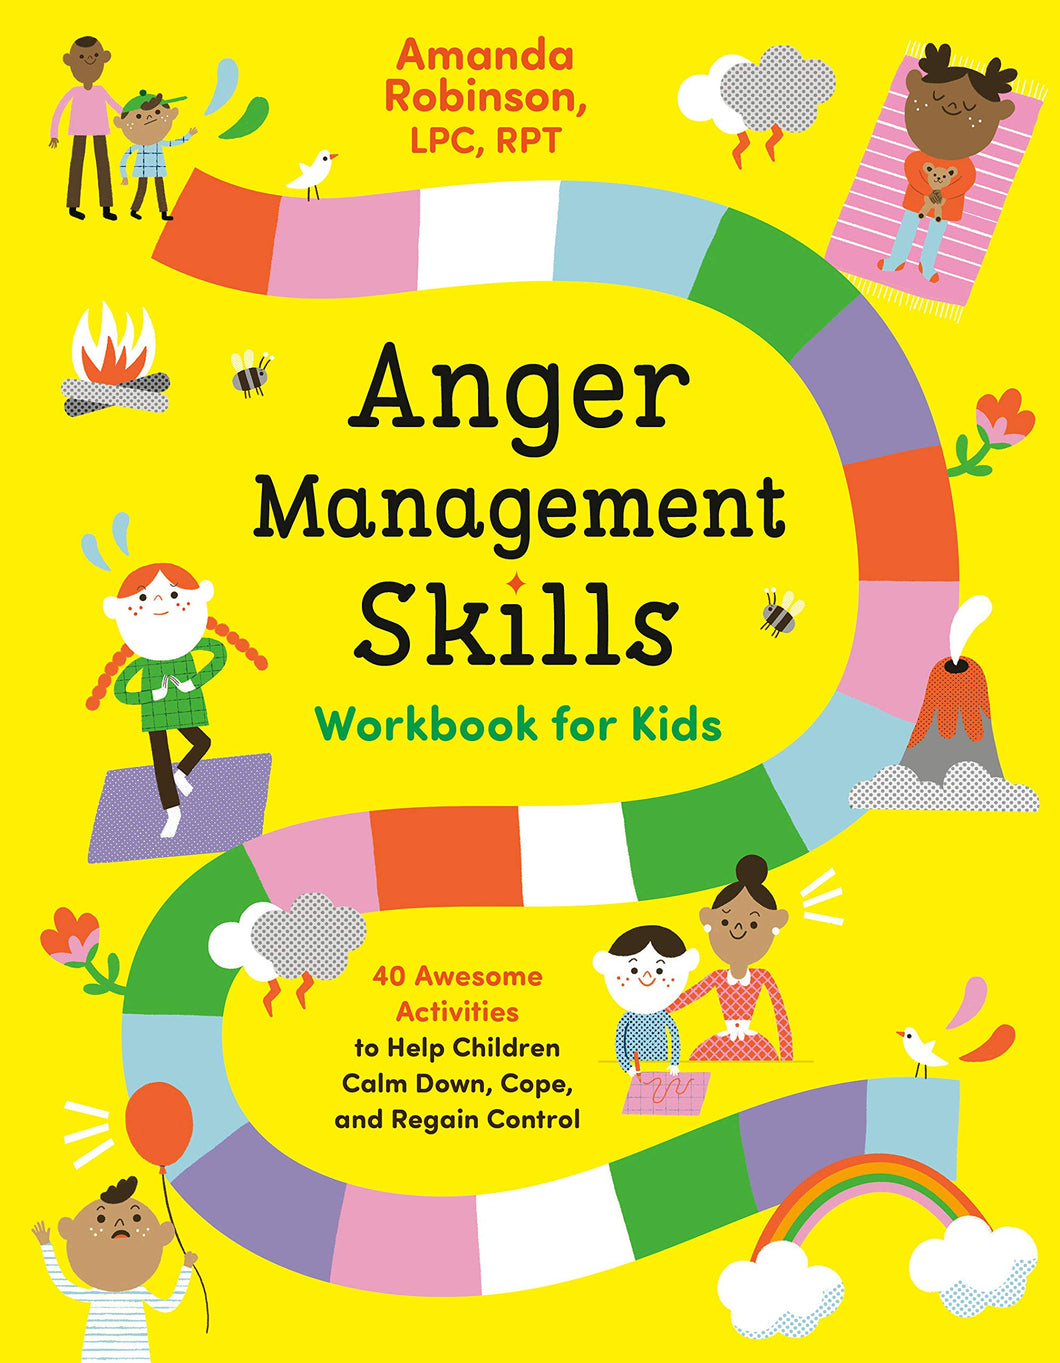 Anger Management Skills Workbook for Kids: 40 Awesome Activities to Help Children Calm Down, Cope, and Regain Control by Amanda Robinson